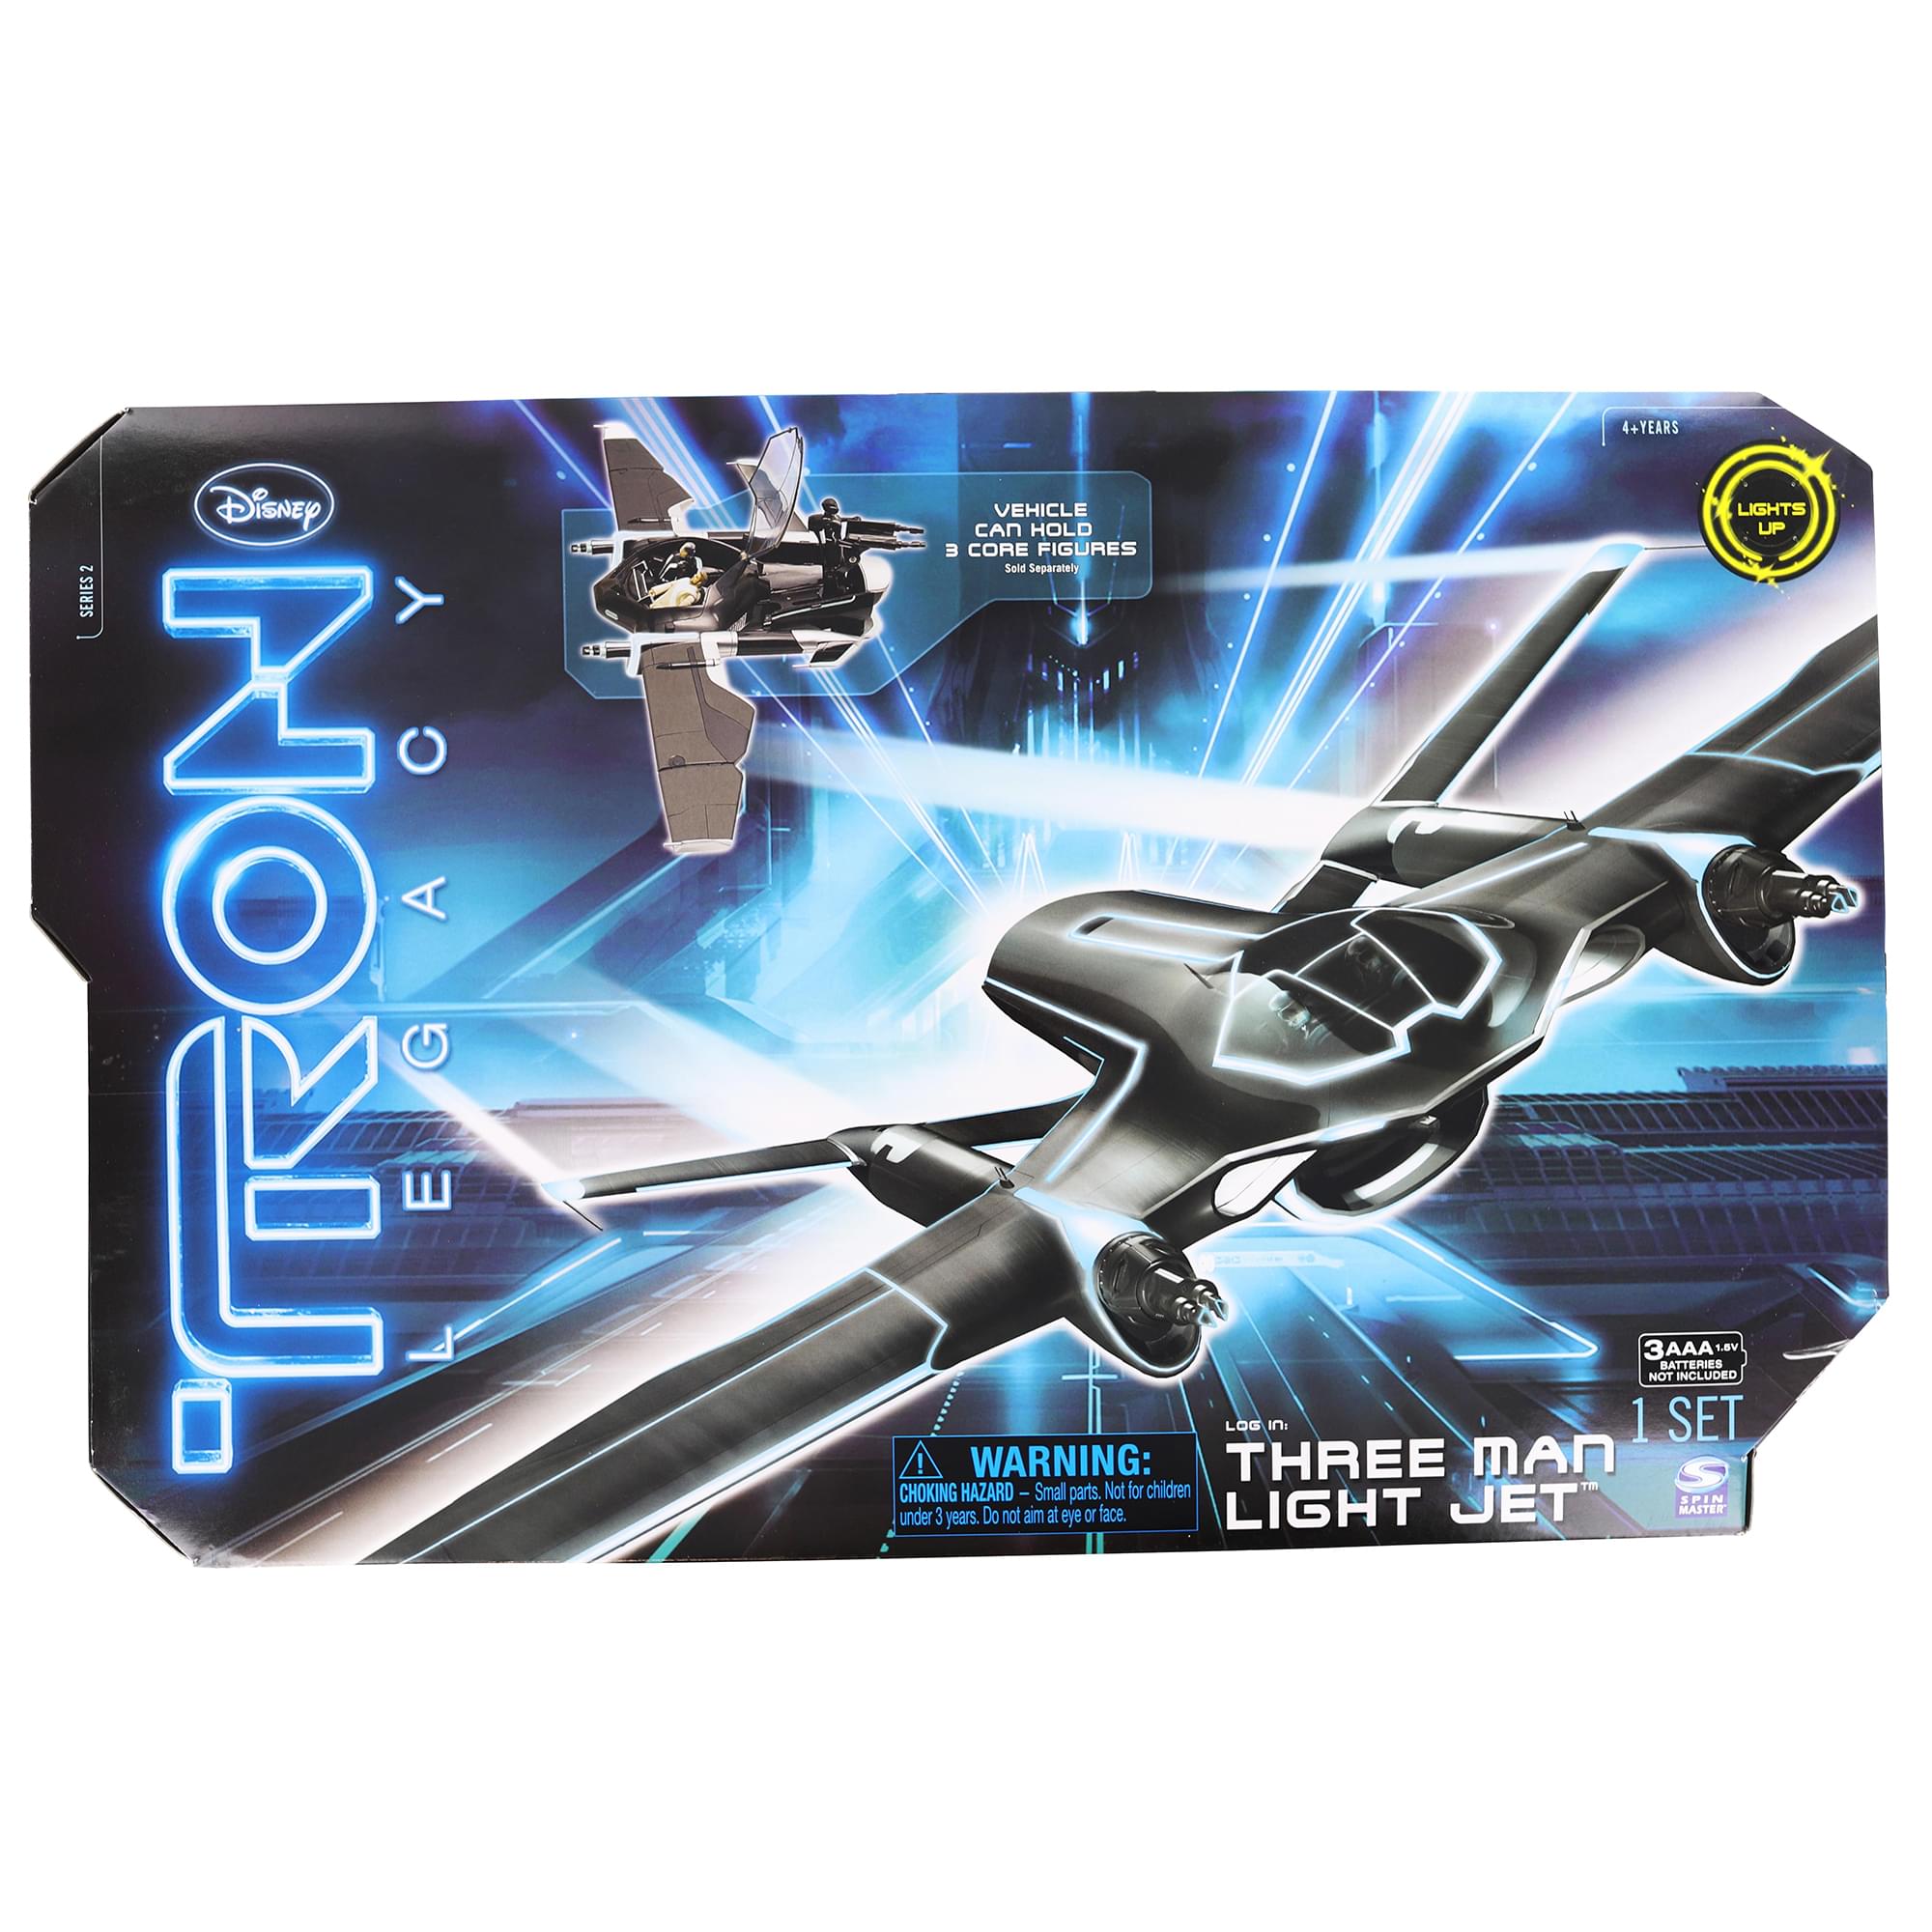 Tron Legacy 3 Man Light Jet Vehicle , For Use With 4 Inch Action Figures